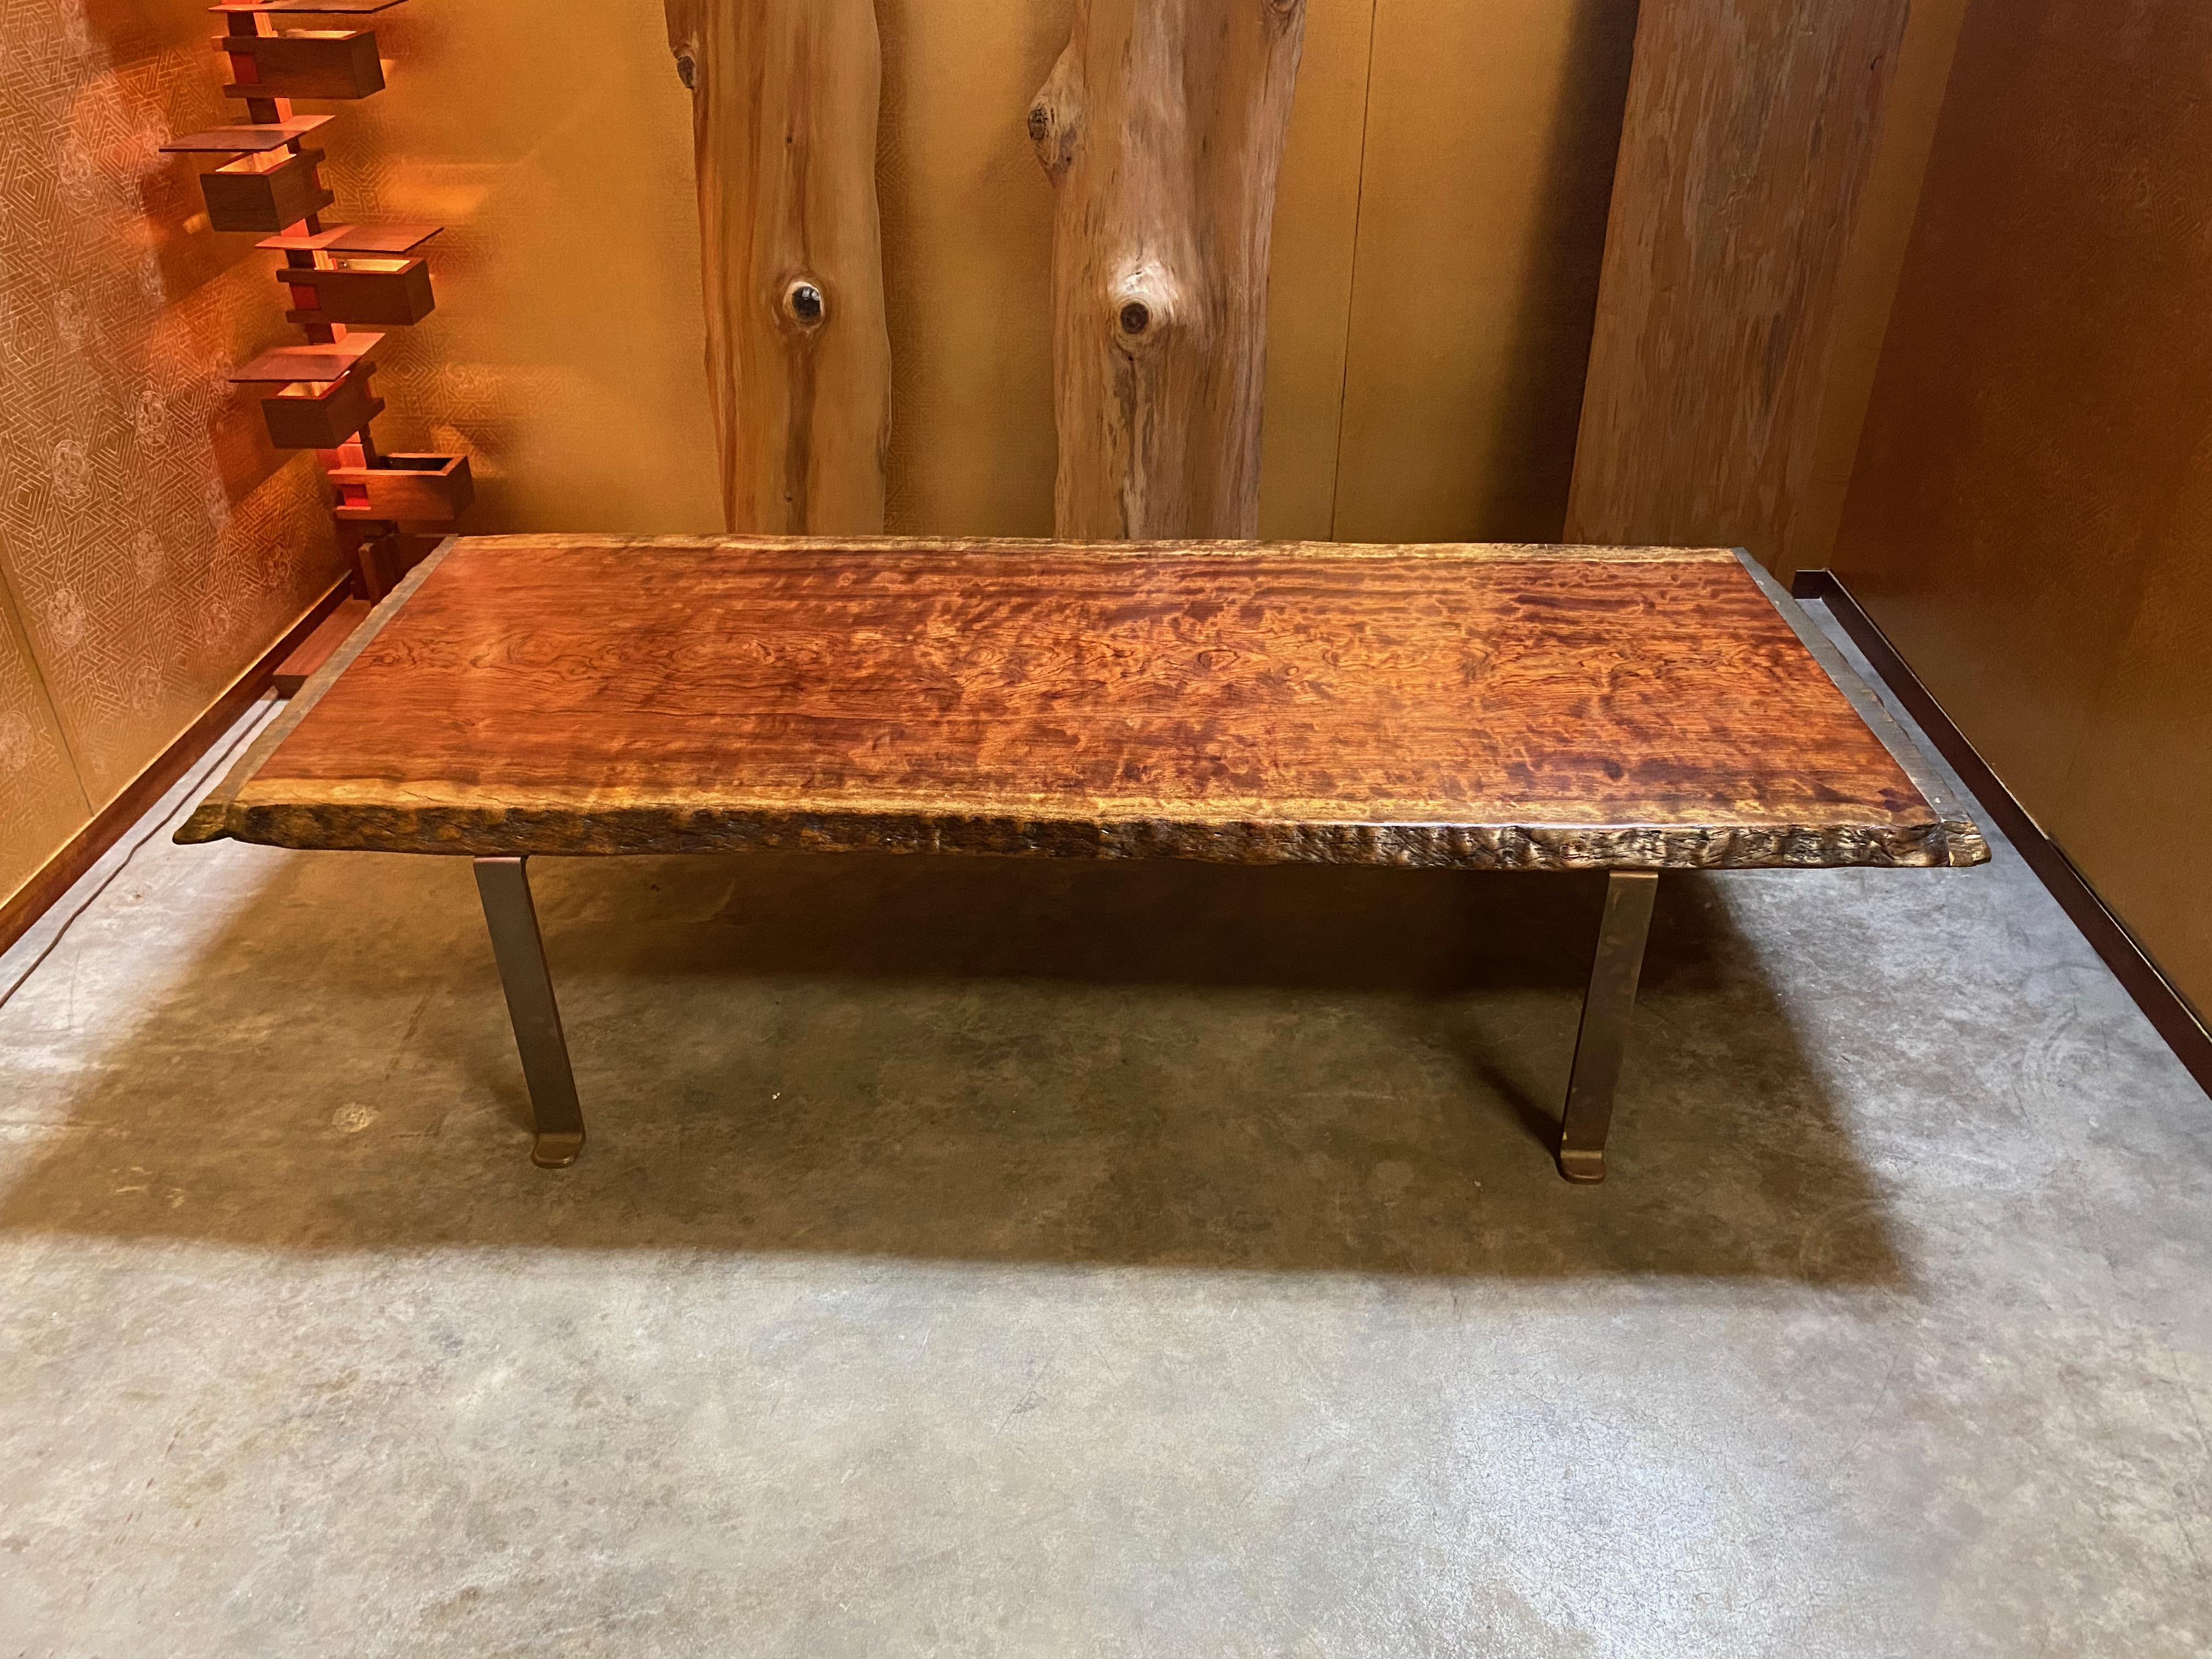 Let us introduce you to an exquisite Crisp coffee table with brass legs and live edge slab with bronze moldings, a true masterpiece of furniture design that showcases the beauty of natural wood and exceptional craftsmanship. This exceptional piece